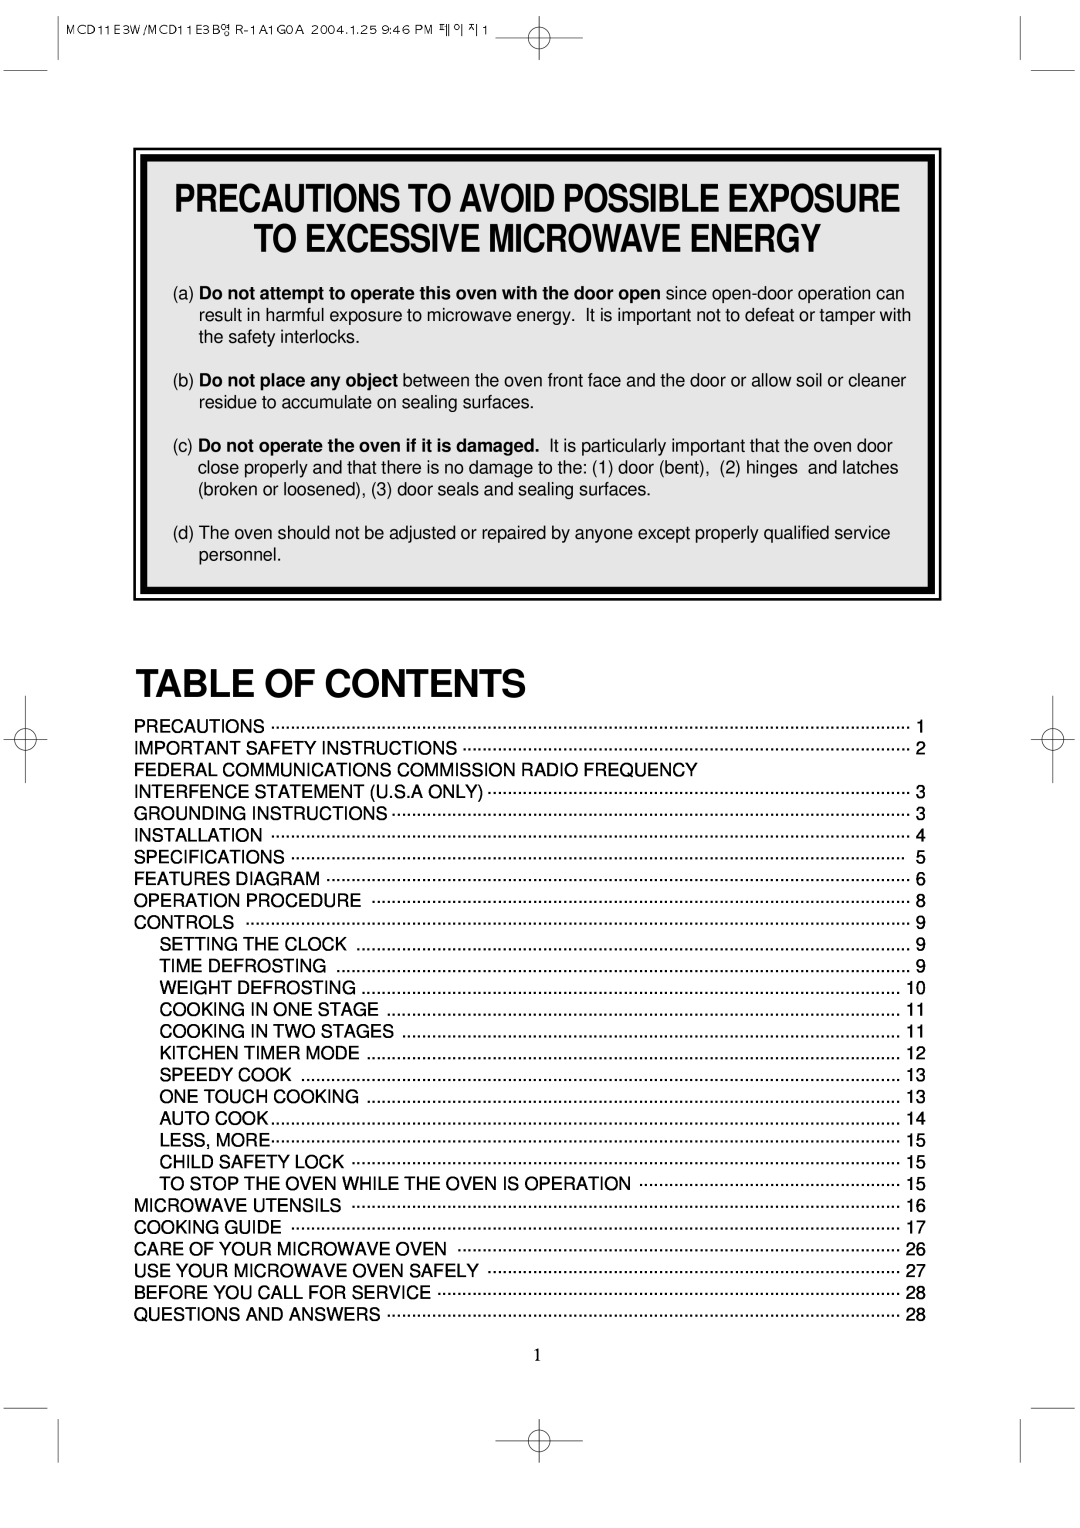 Magic Chef MCD11E3B Precautions To Avoid Possible Exposure, To Excessive Microwave Energy, Table Of Contents 